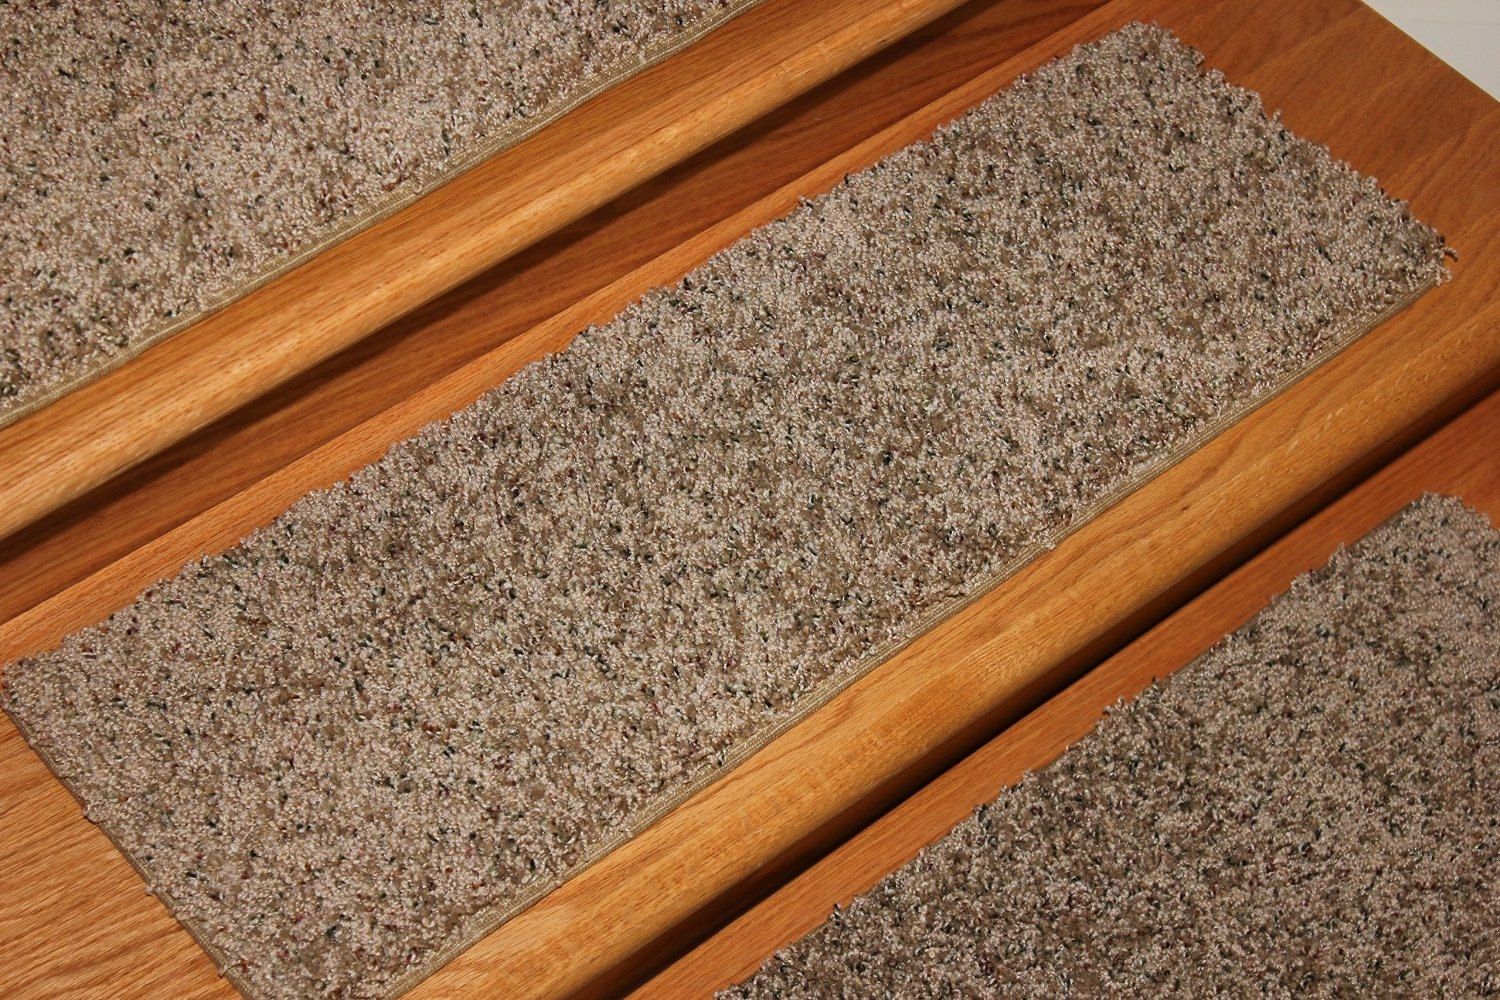 Stair Treads Etsy With Regard To 8 Stair Treads (View 1 of 15)